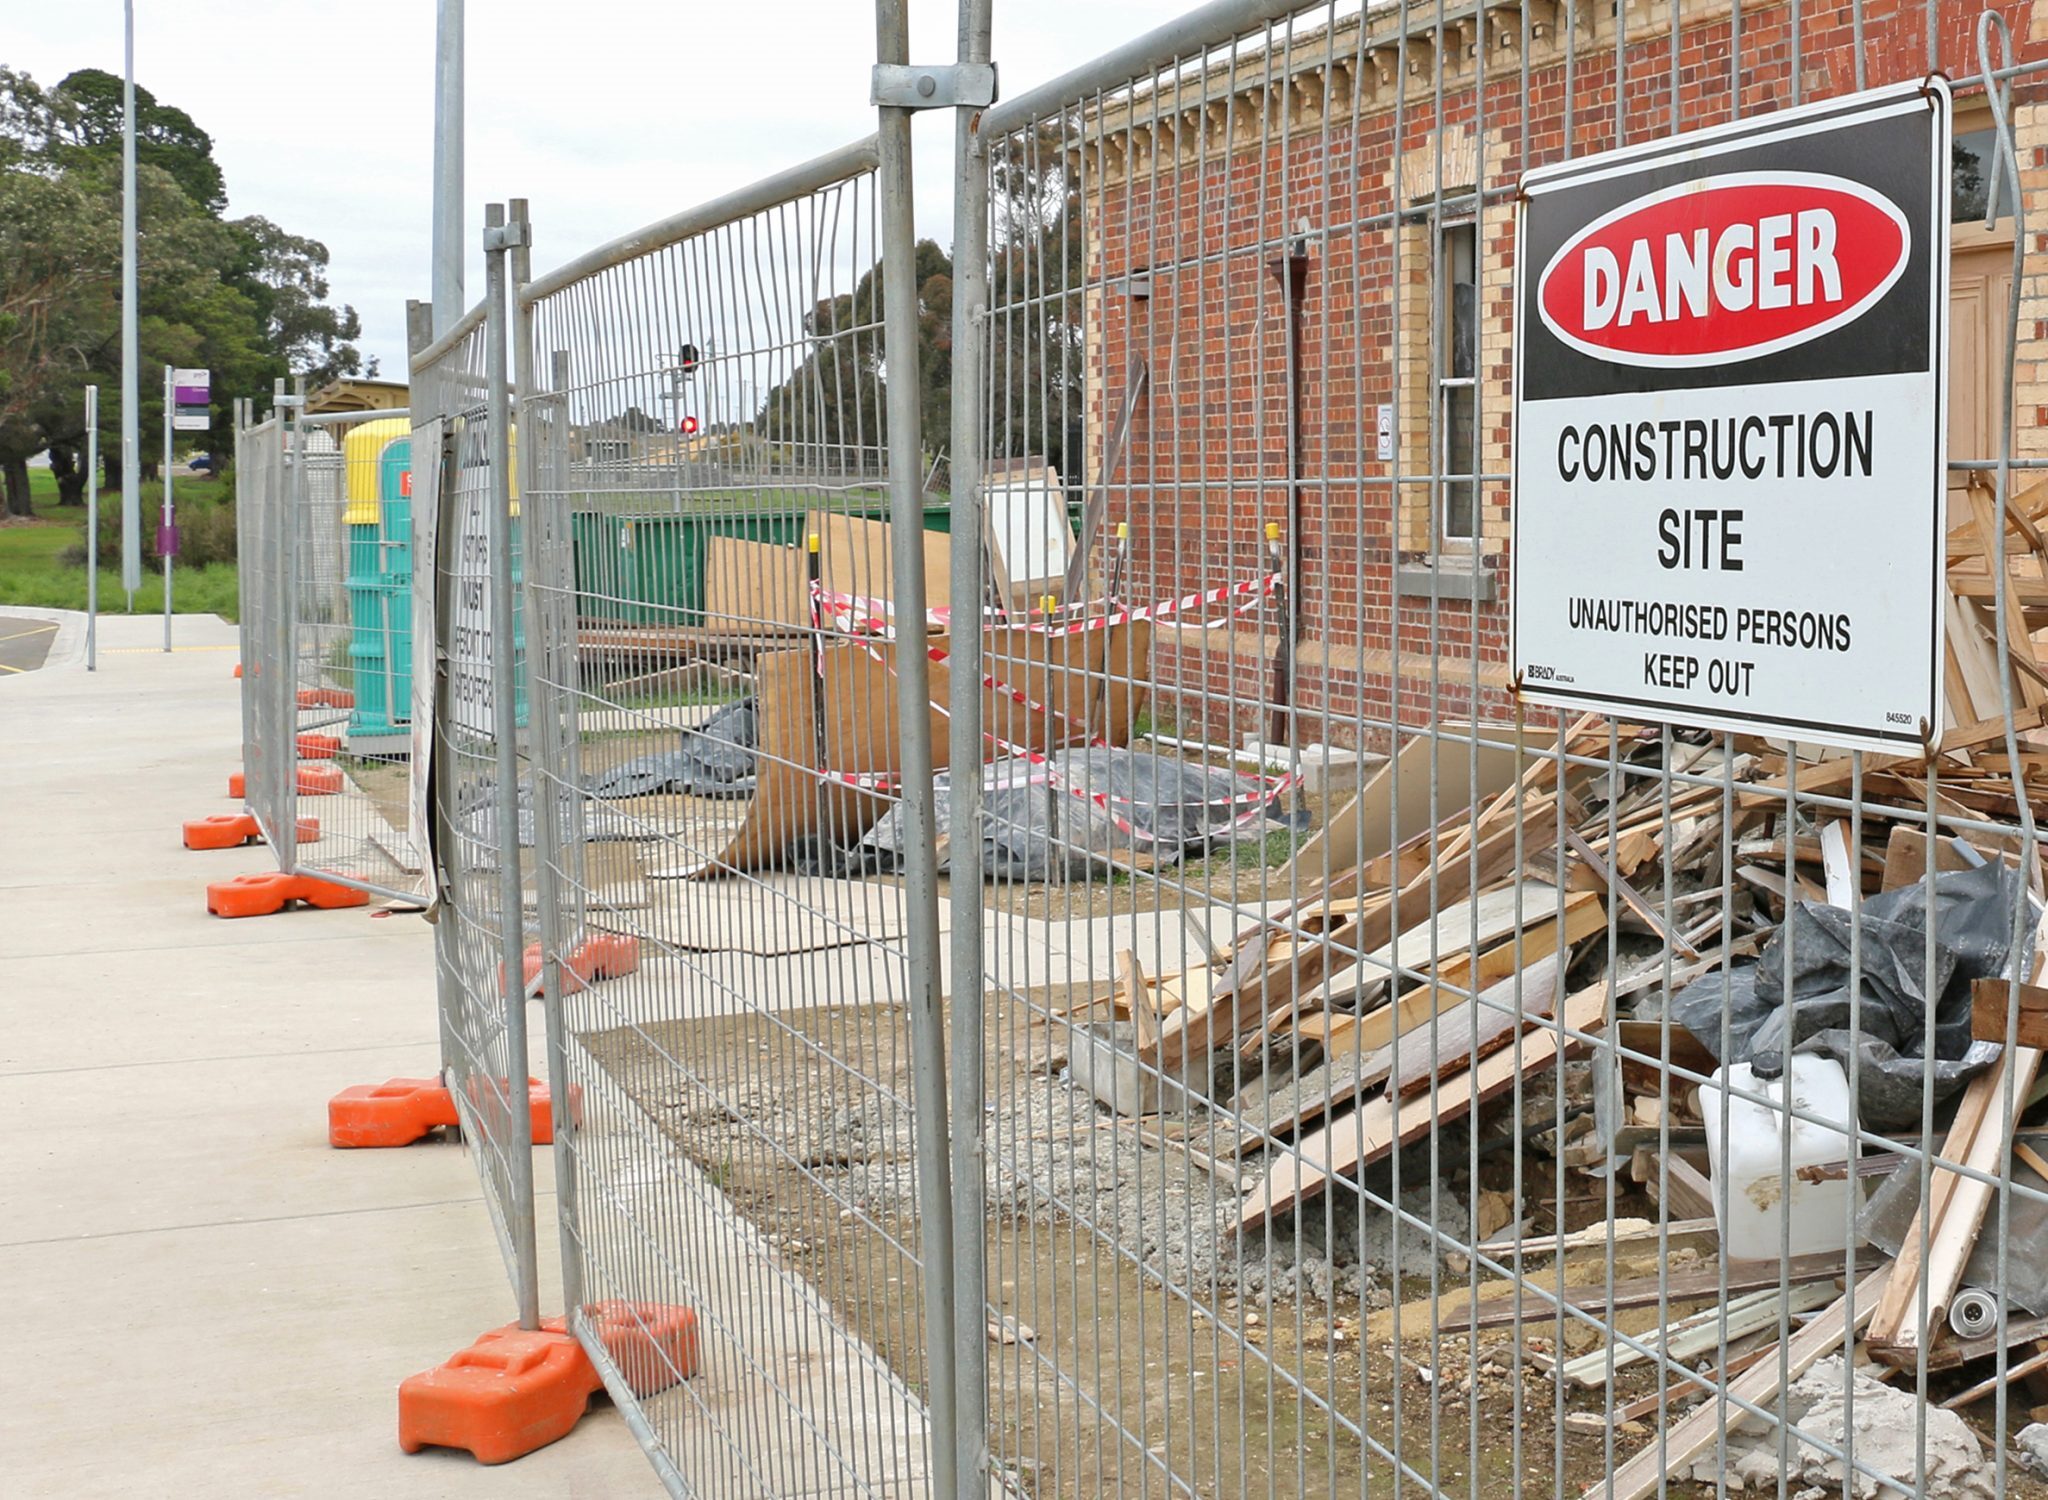 Construction site secured with metal fencing and a 'Danger Construction Site' sign warning unauthorized persons to keep out.